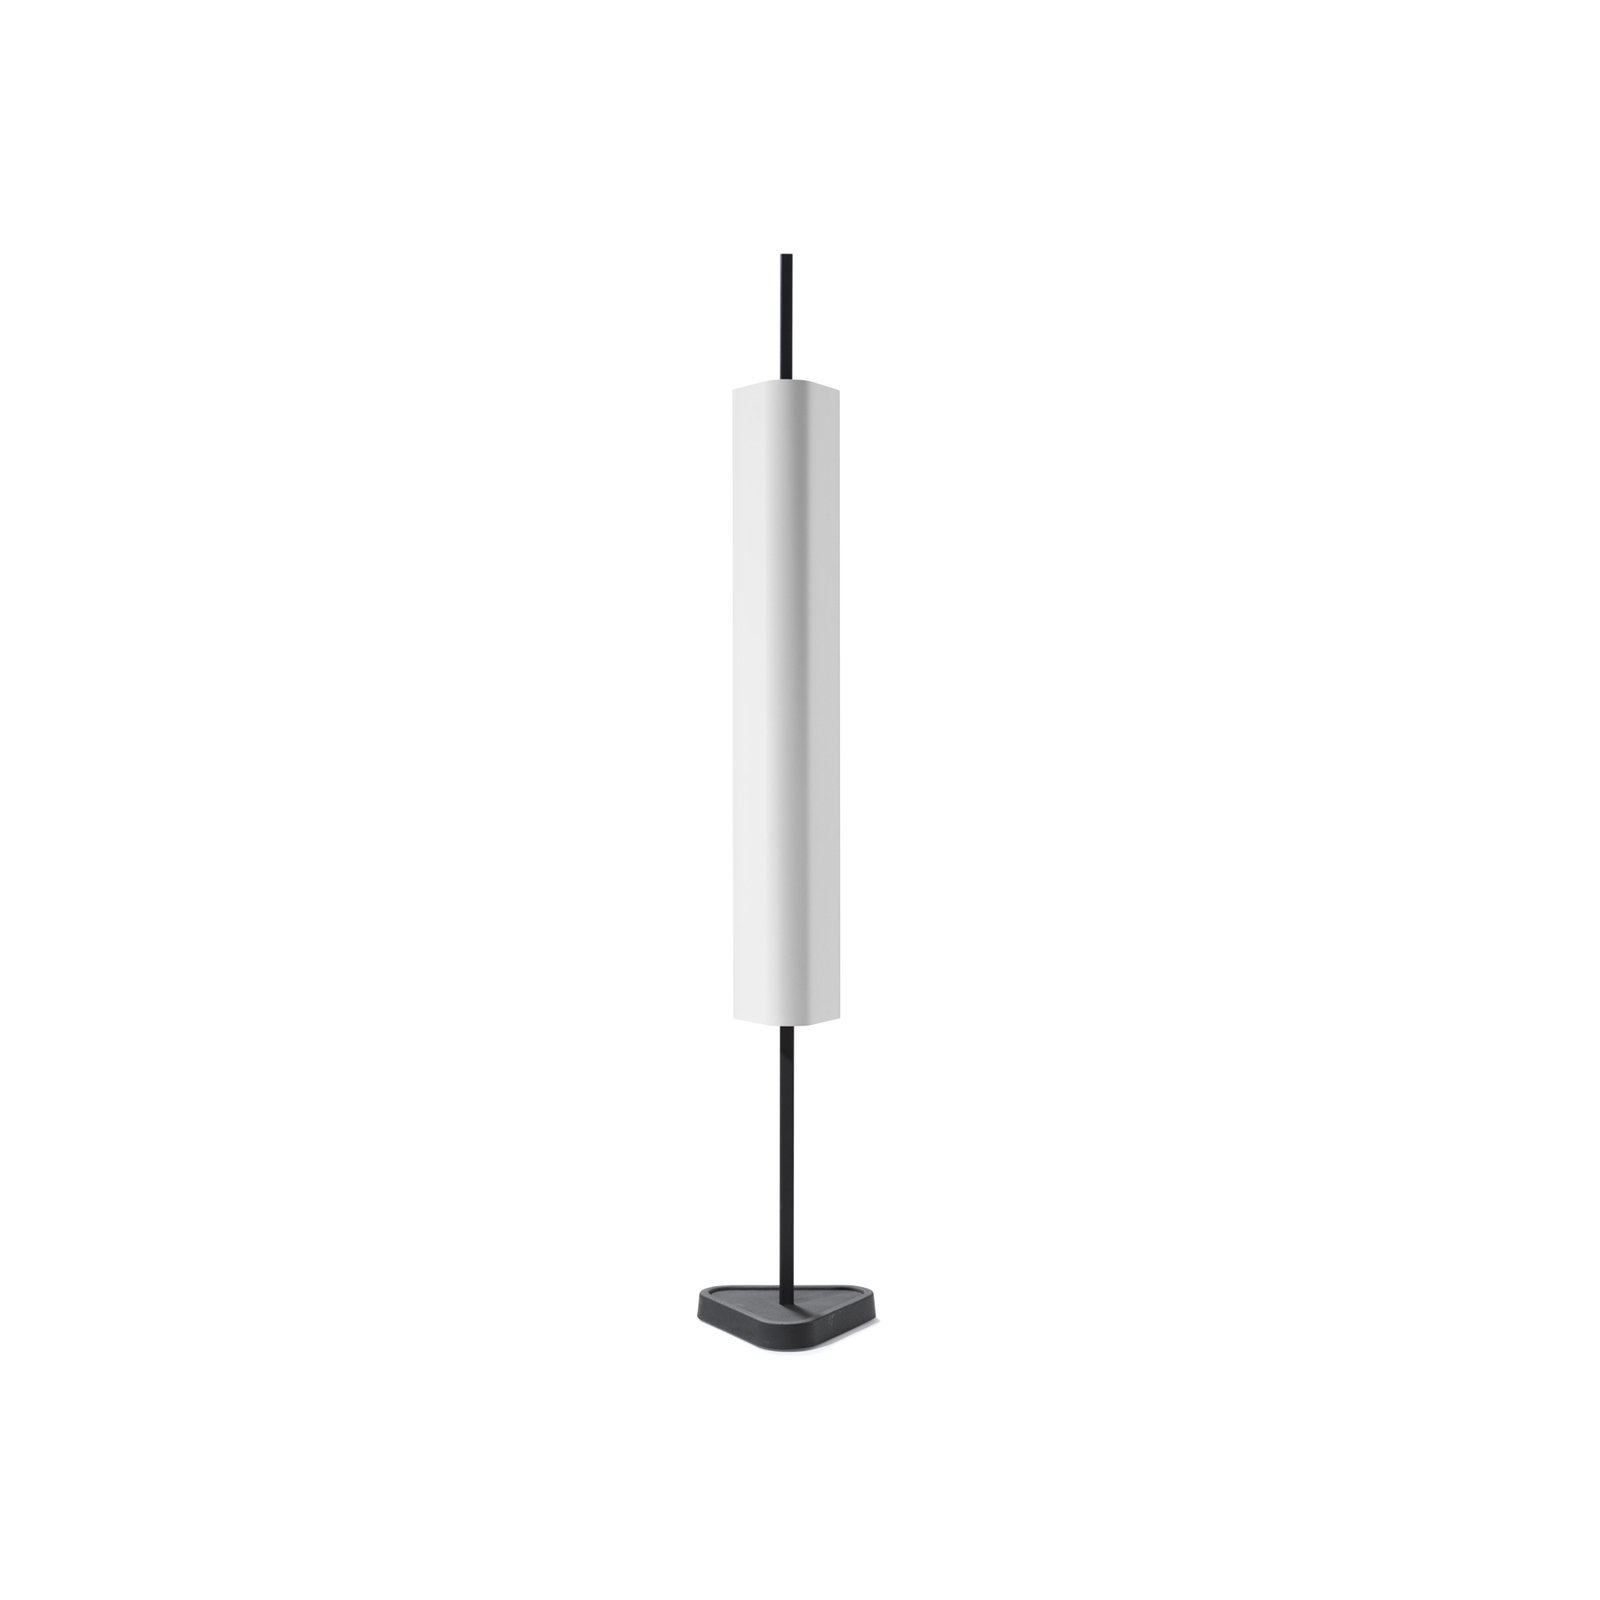 FLOS Emi LED table lamp, white, height 114 cm, dimmable